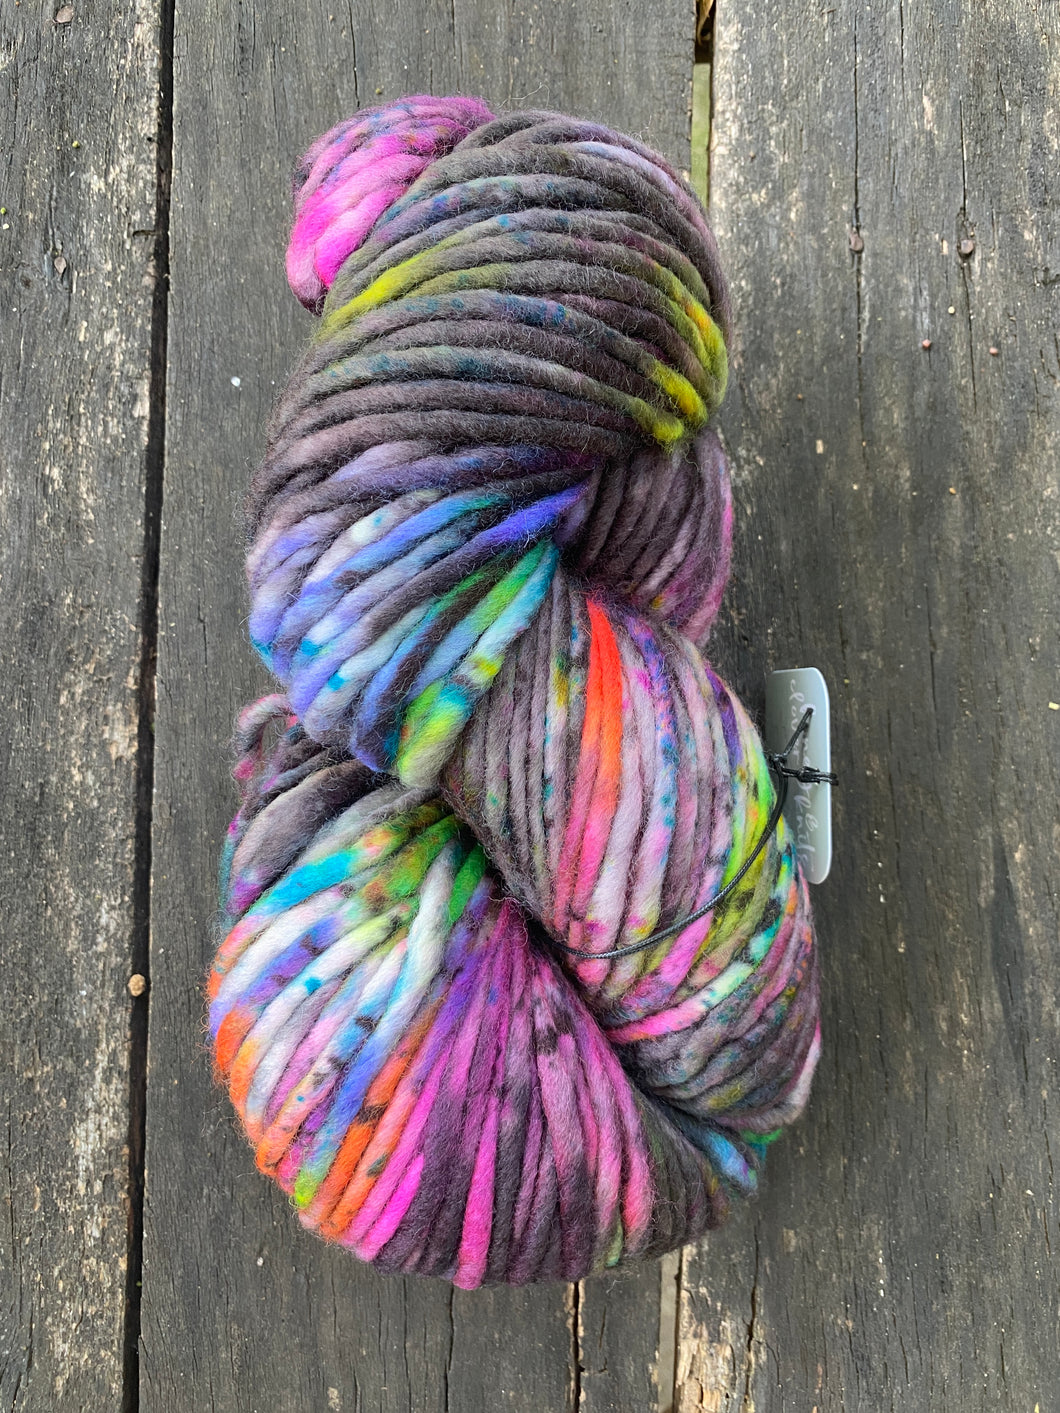 Honey and Clover Knits hand dyed merino wool yarn colorful indie yarn super bulky Rave